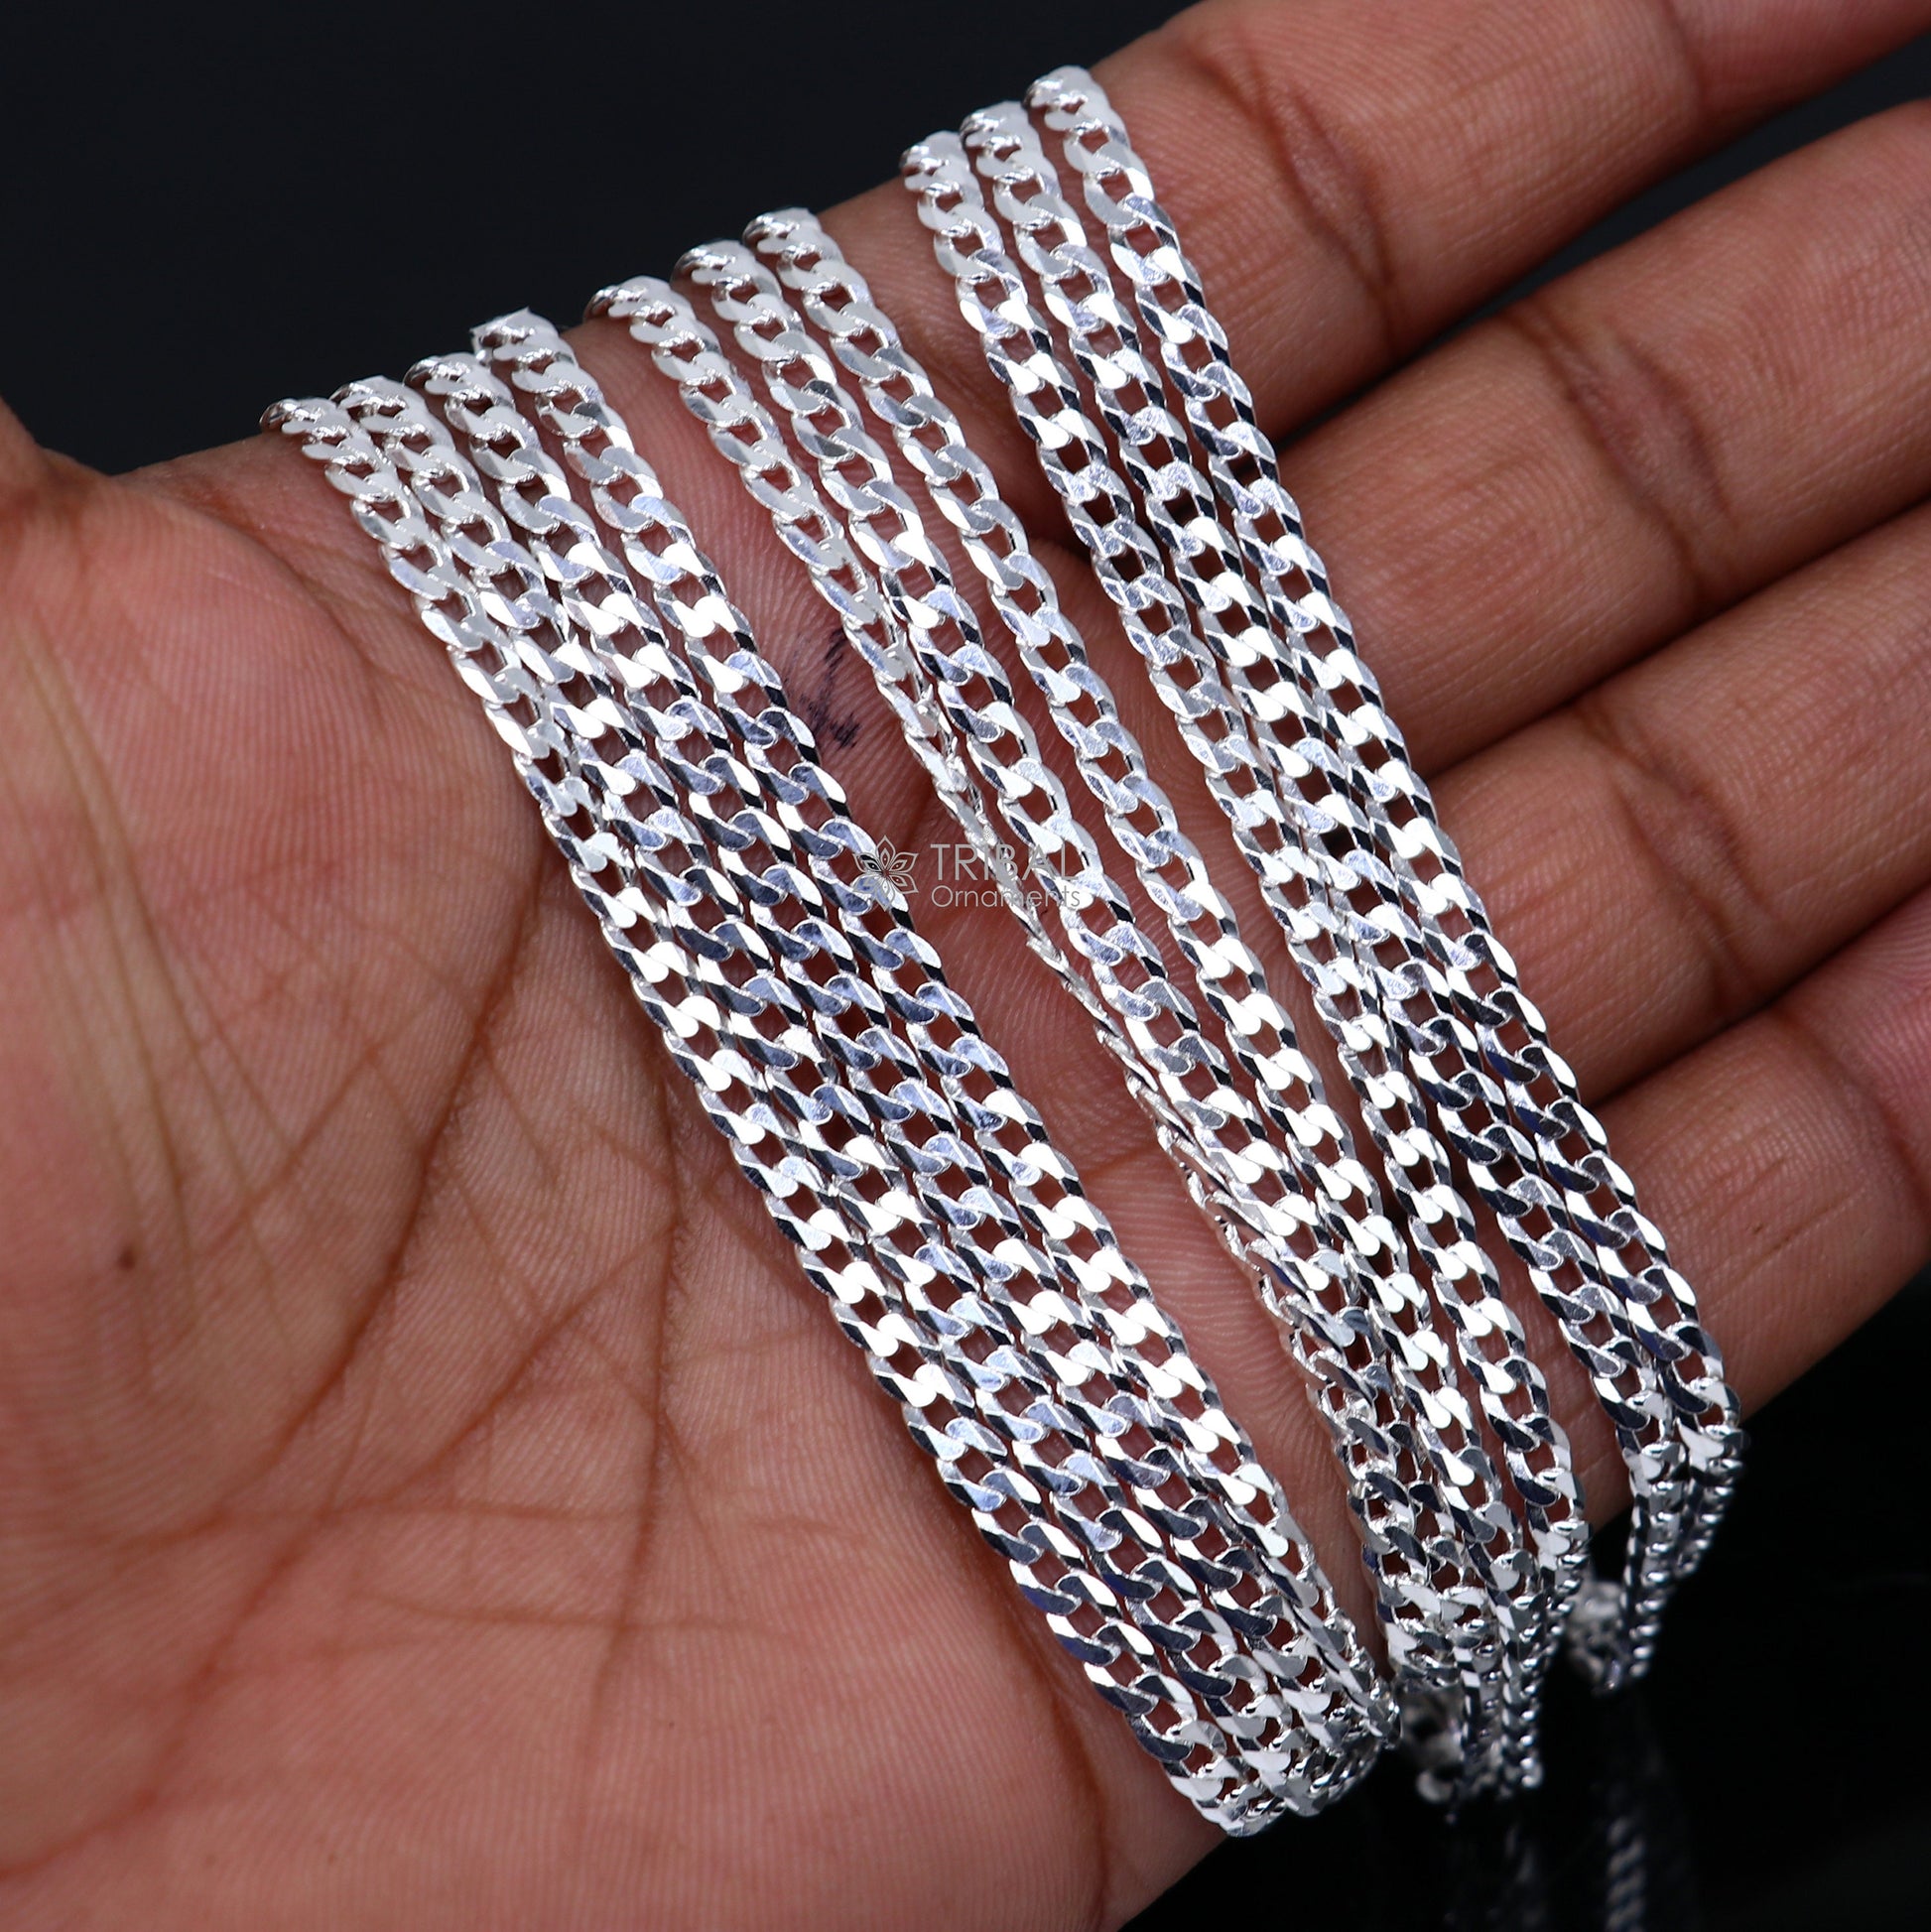 20" 3MM 925 sterling silver handmade solid fancy stylish silver chain necklace curb cuban chain best gifting jewelry from India ch245 - TRIBAL ORNAMENTS